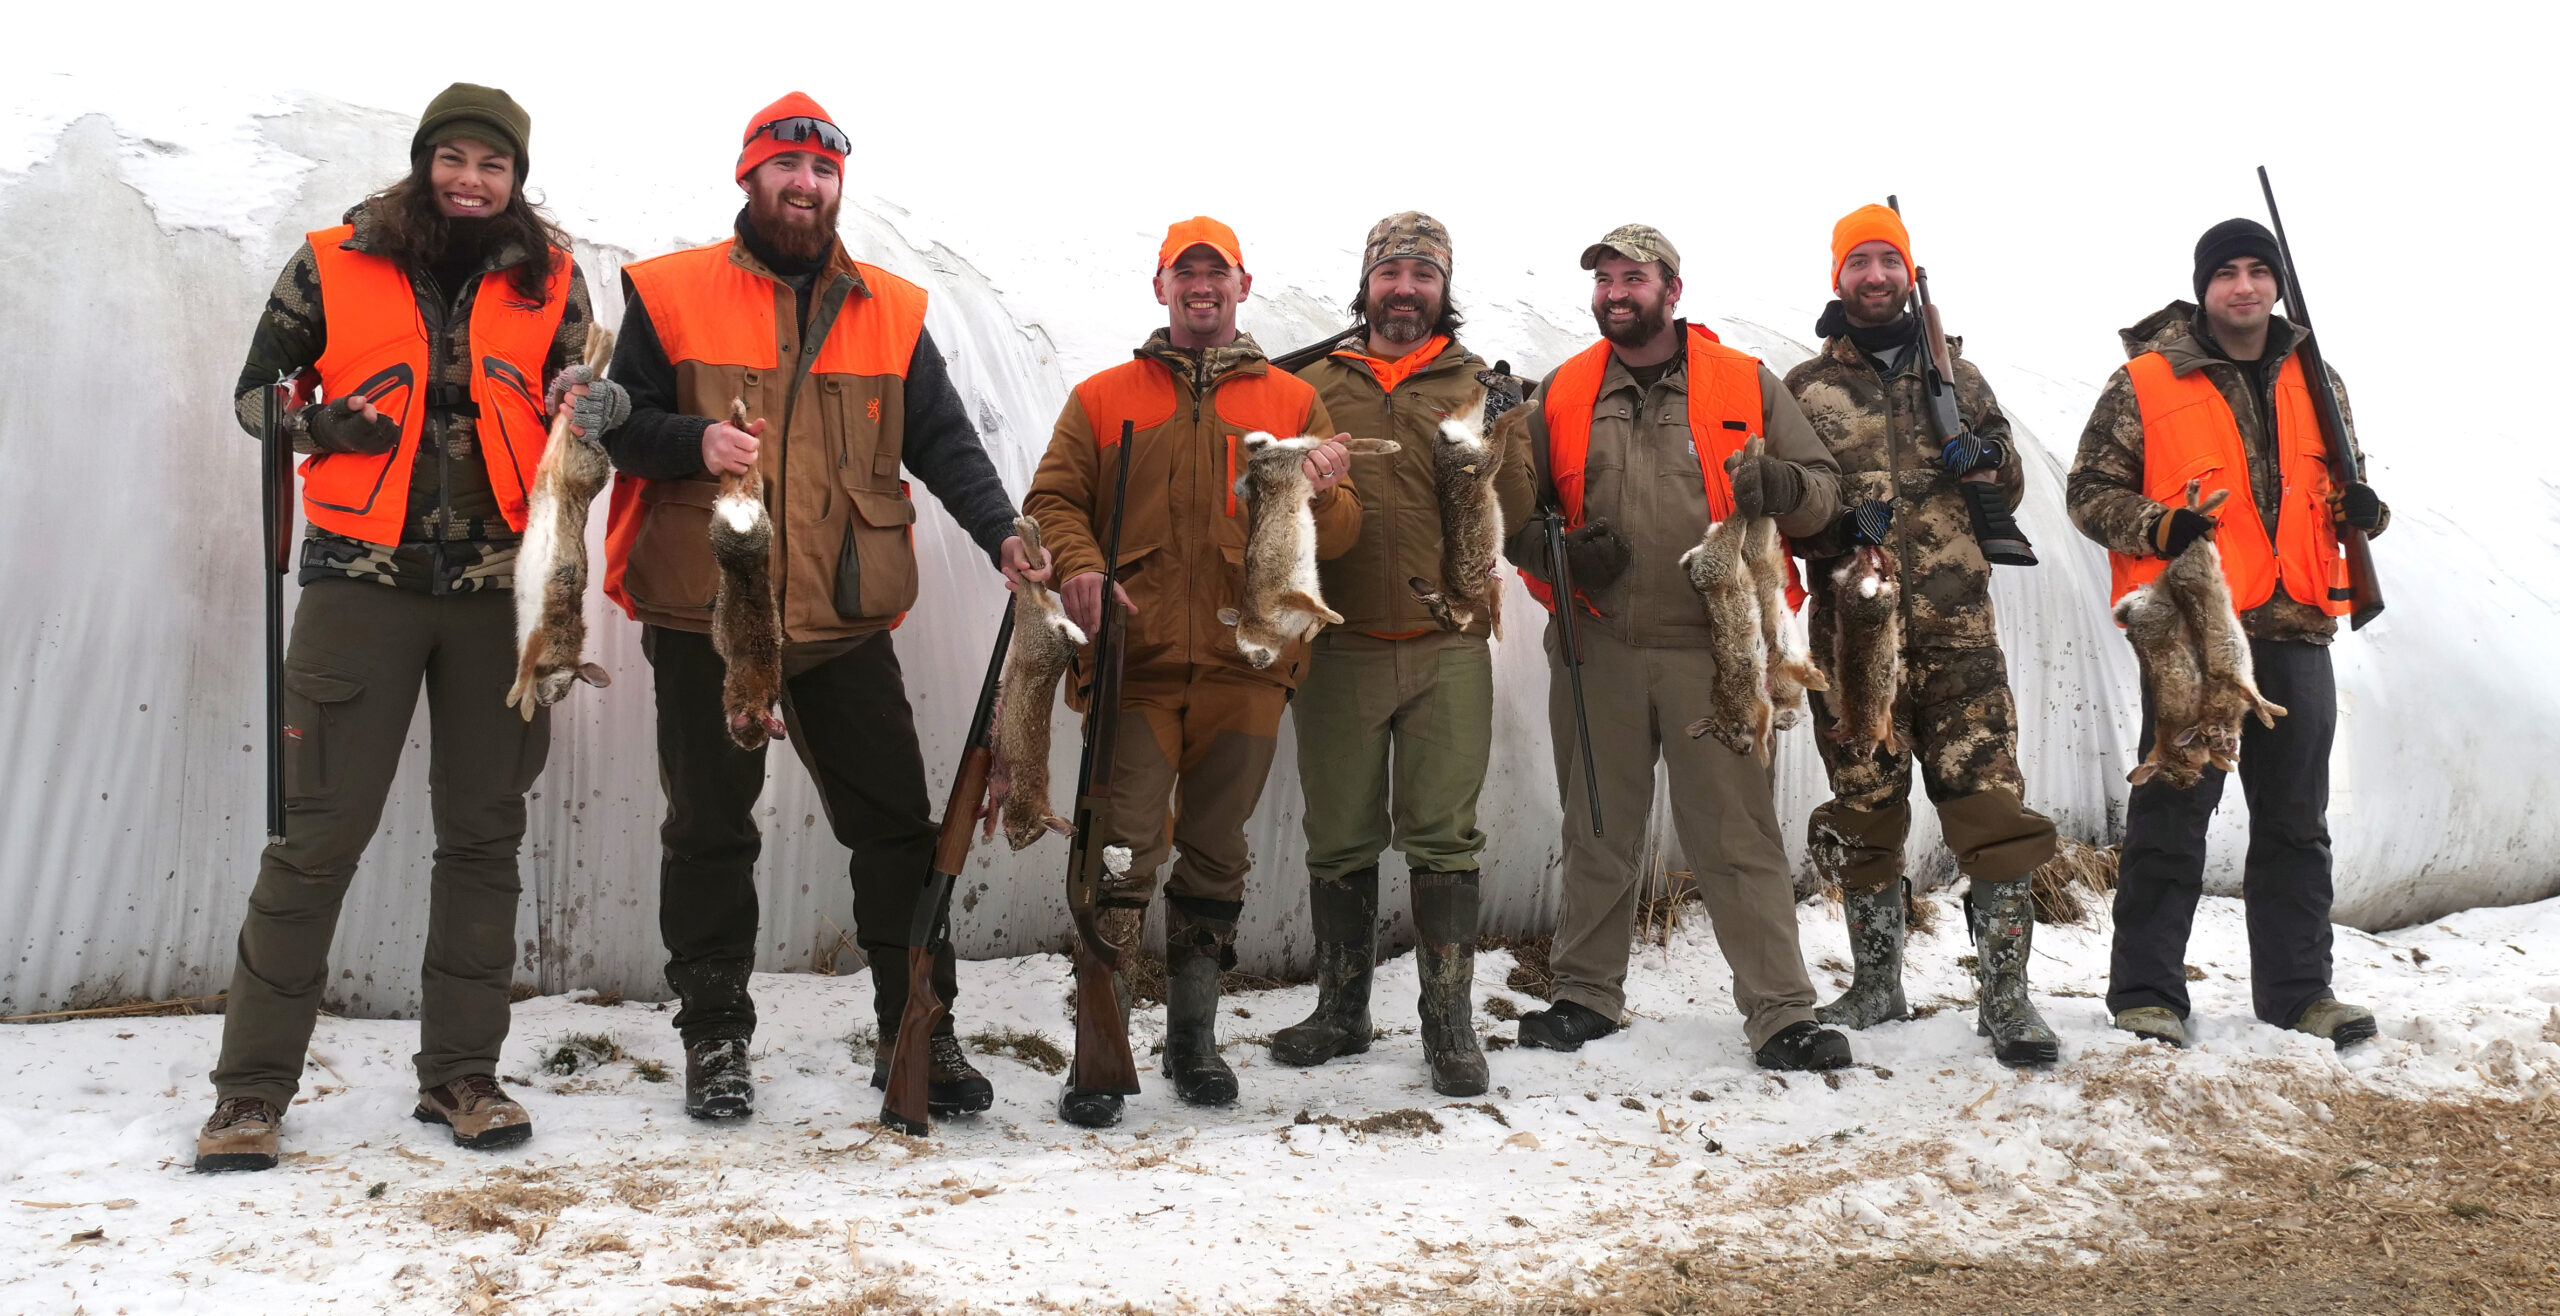 A group of happy rabbit hunters in blaze orange and camo on a snowy day.